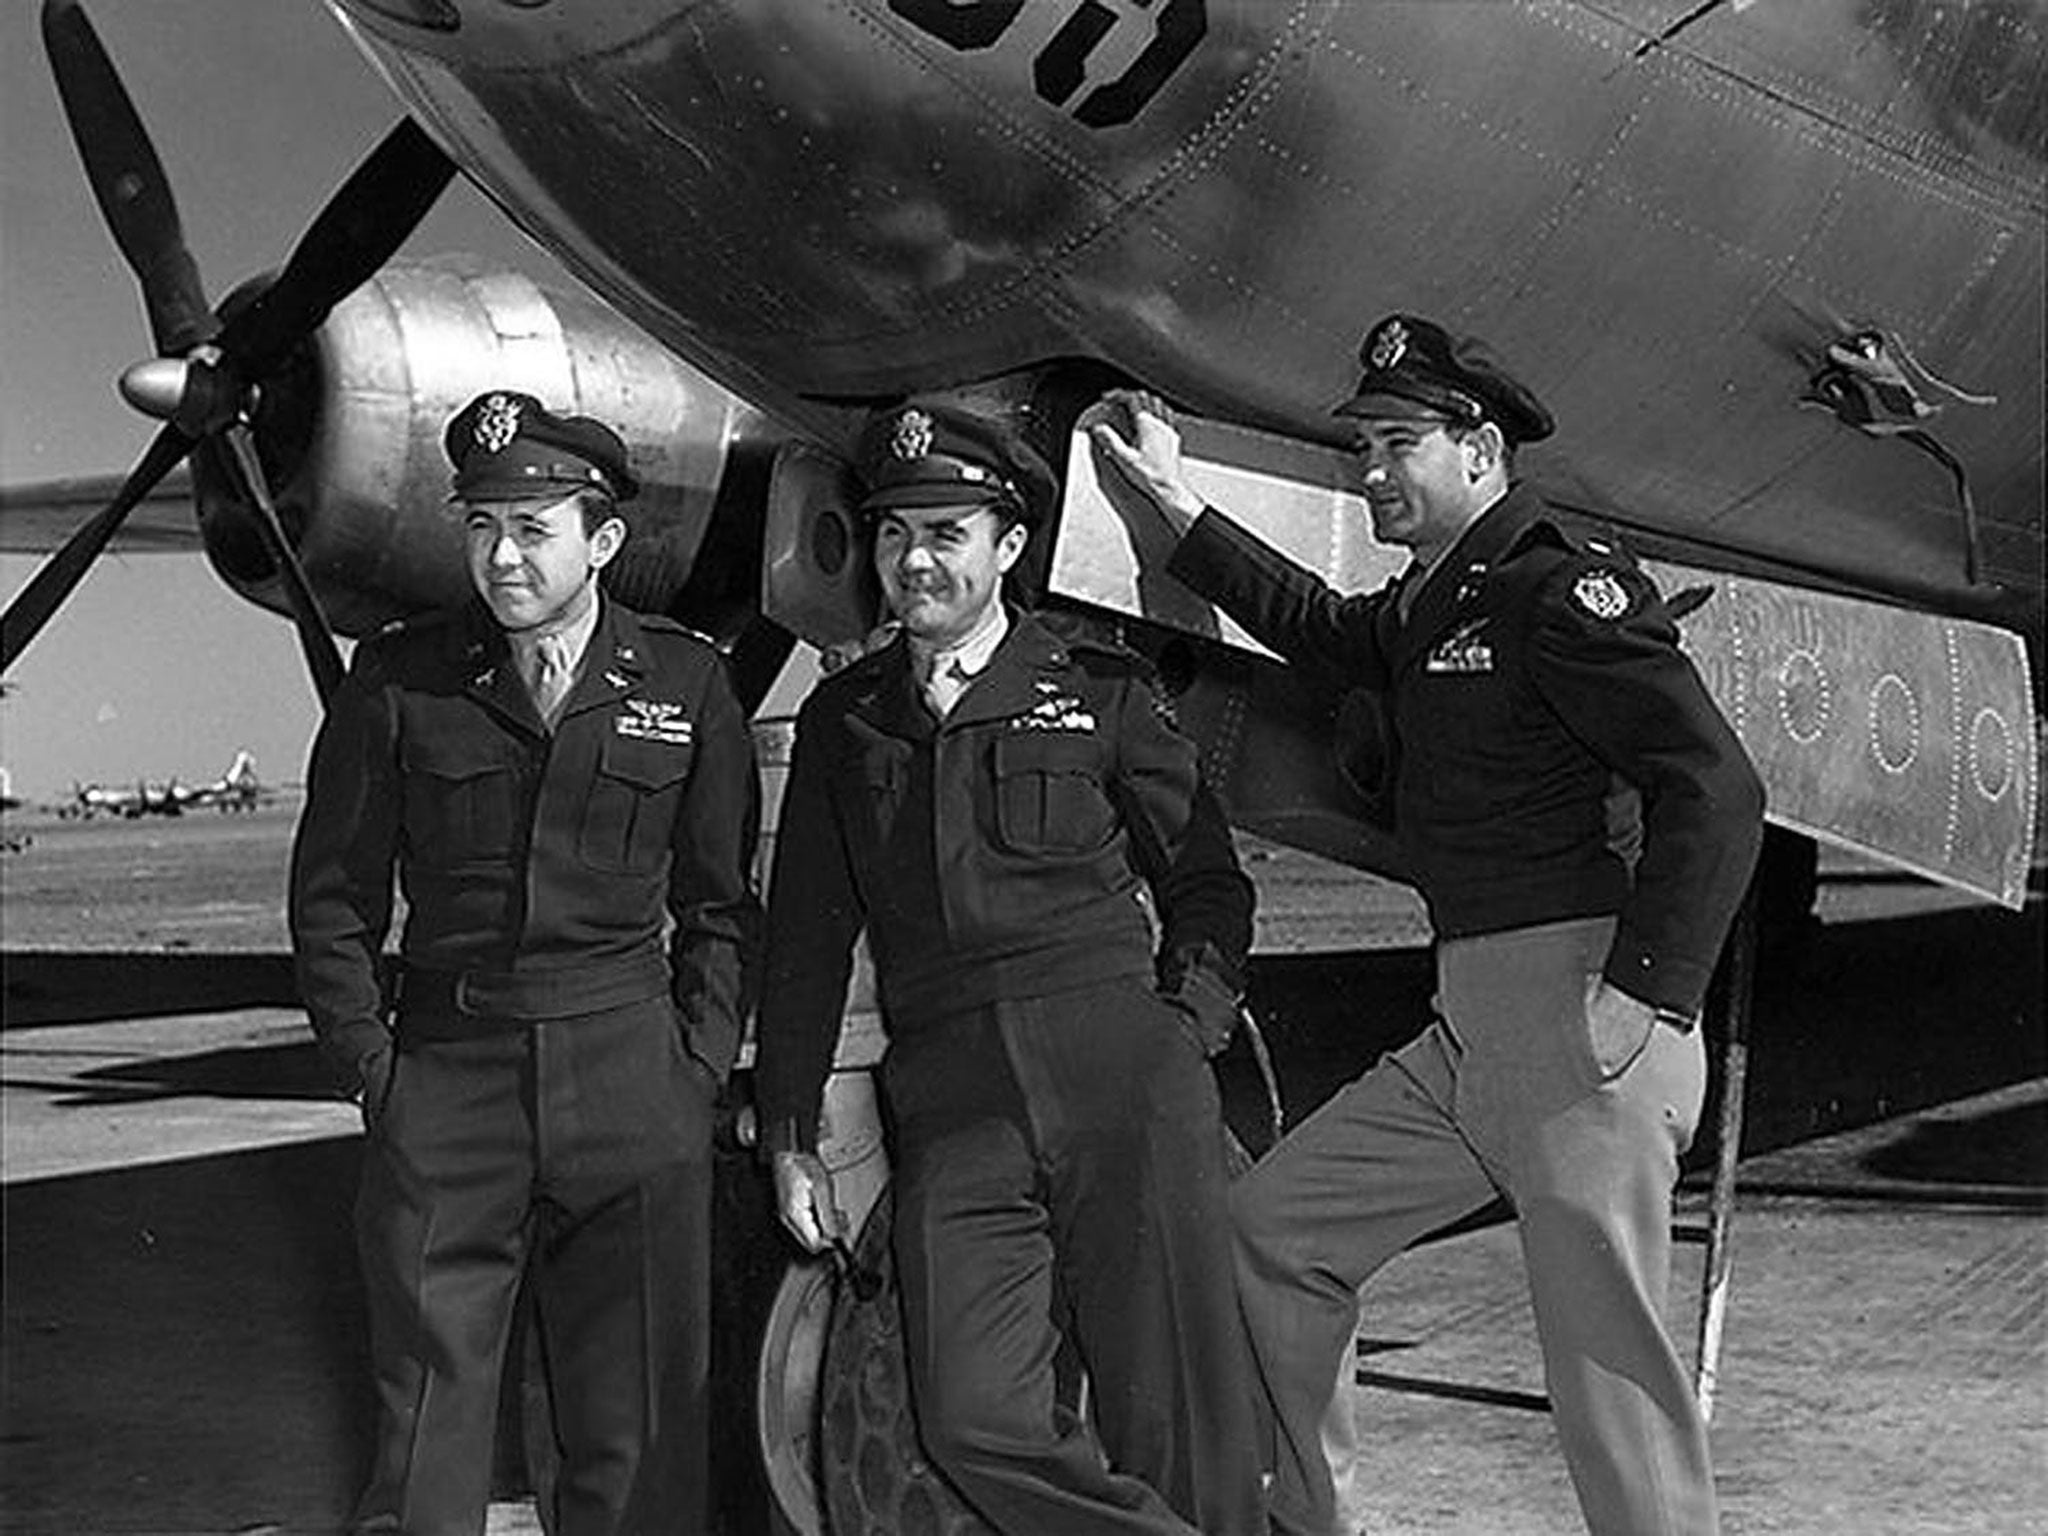 The crew of ‘Enola Gay’ after their mission to Hiroshima,
left to right, Van Kirk, Paul Tibbets and Thomas Ferebee